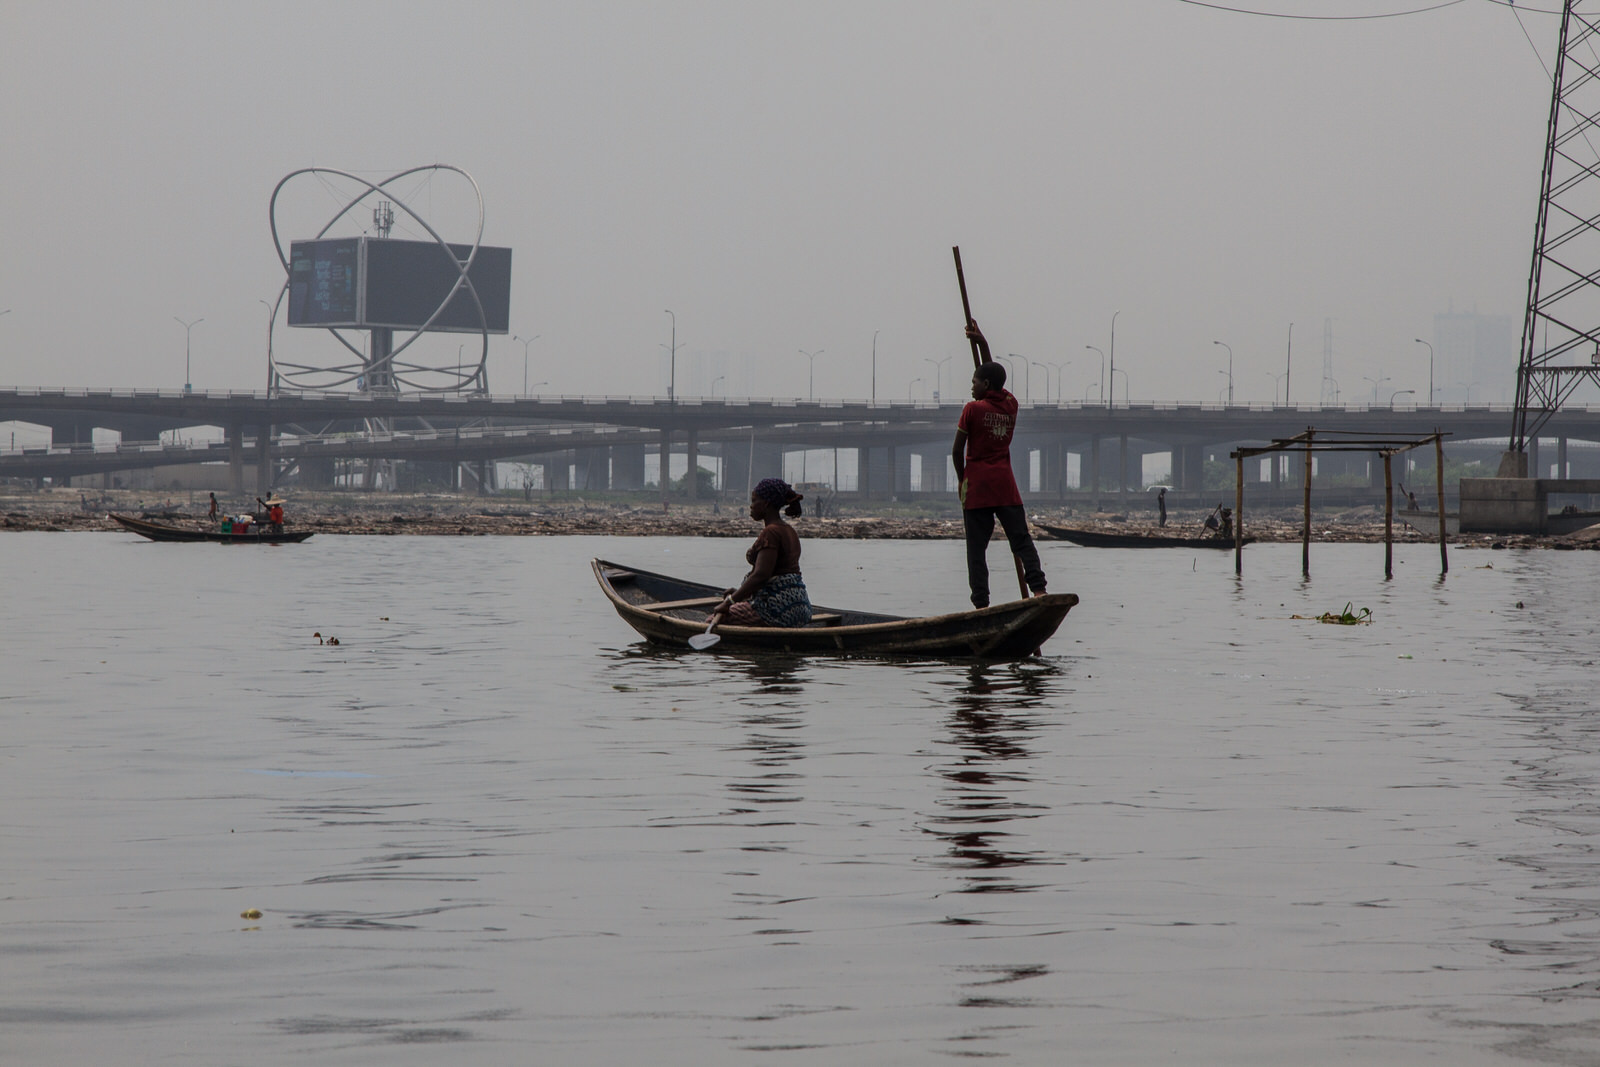  Fishing remains one of the main sources of livelihood for members of the community. Fishermen work in the lagoon with the Third Mainland Bridge in the background - the 2nd longest bridge in Africa. 